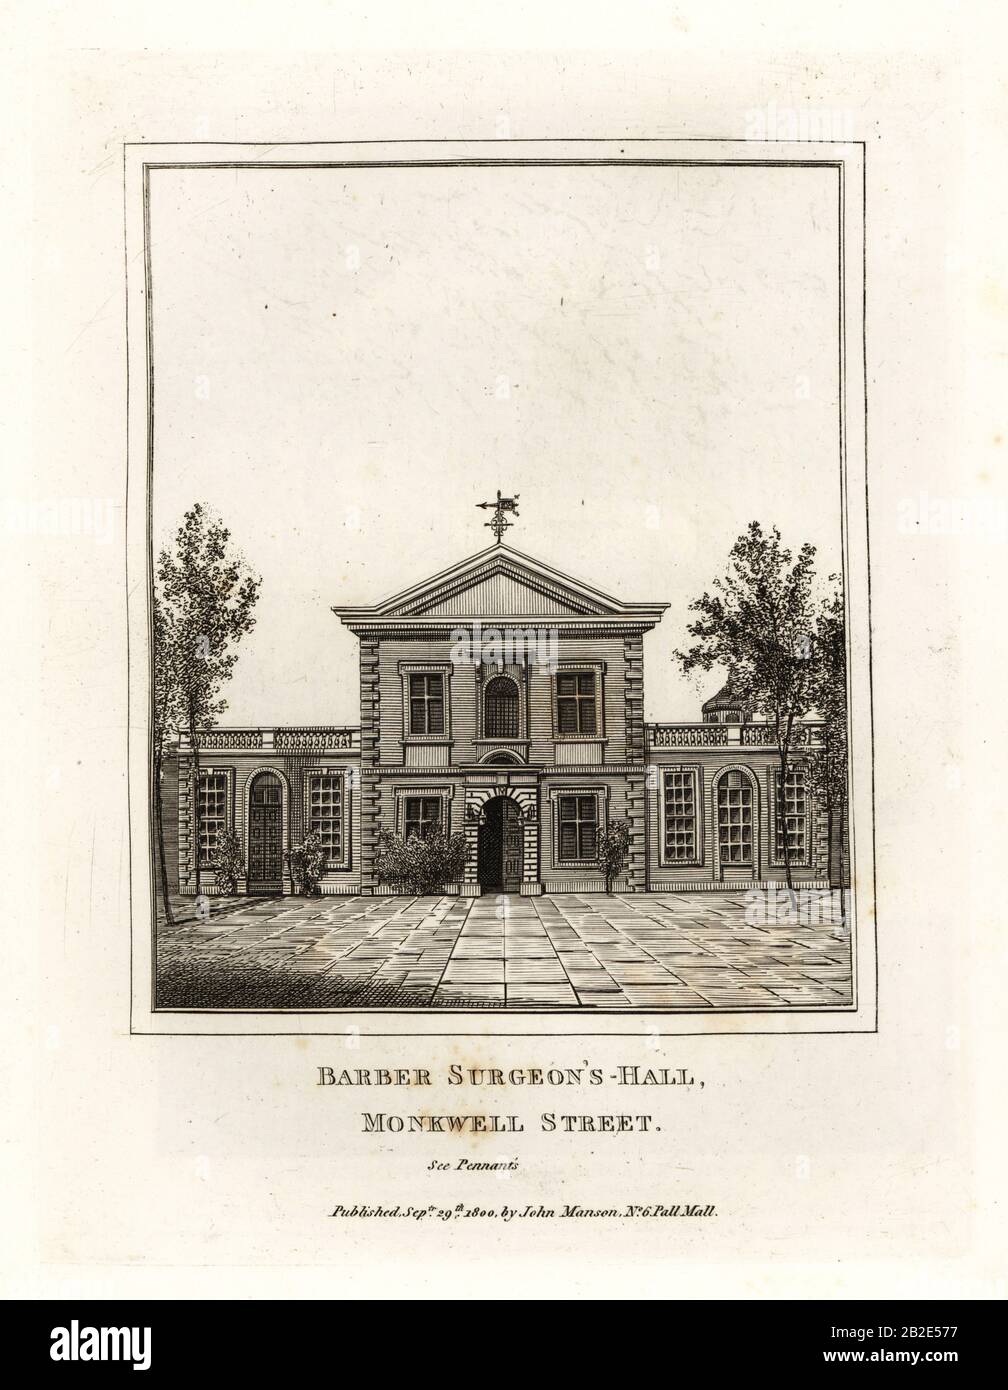 Barber Surgeon’s Hall, Monkwell Street. Copperplate engraving by John Thomas Smith after original drawings by members of the Society of Antiquaries from his J.T. Smith’s Antiquities of London and its Environs, J. Sewell, R. Folder, J. Simco, London, 1800. Stock Photo